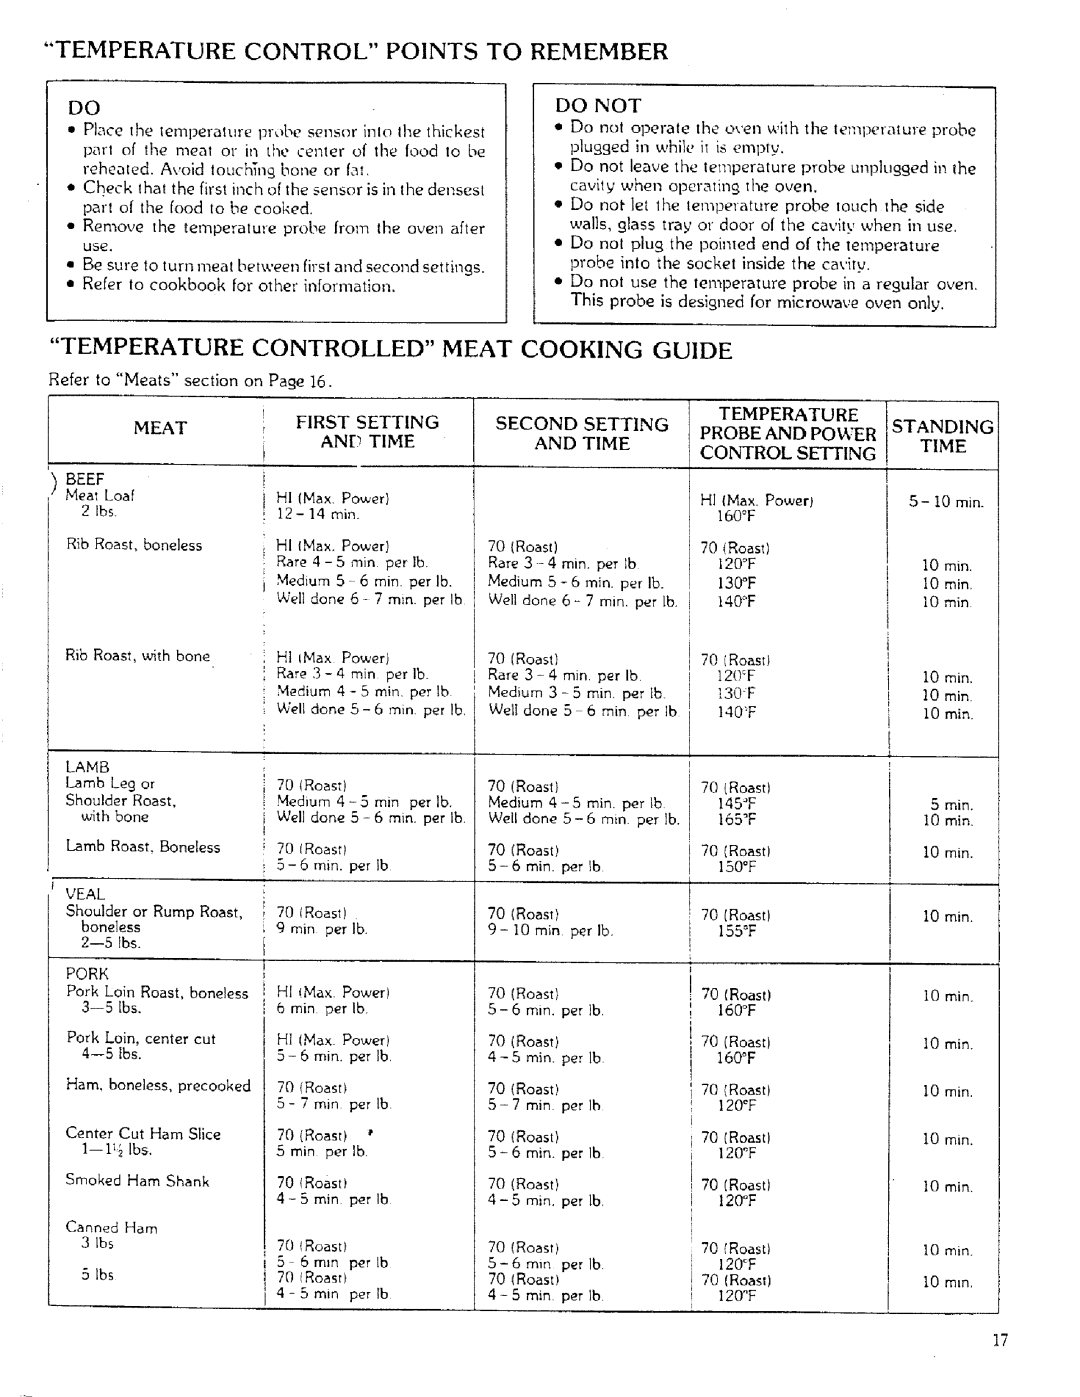 Sears 85951 Temperature Control Points To Remember, Temperature Controlled Meat Cooking Guide, First Setting And Time 